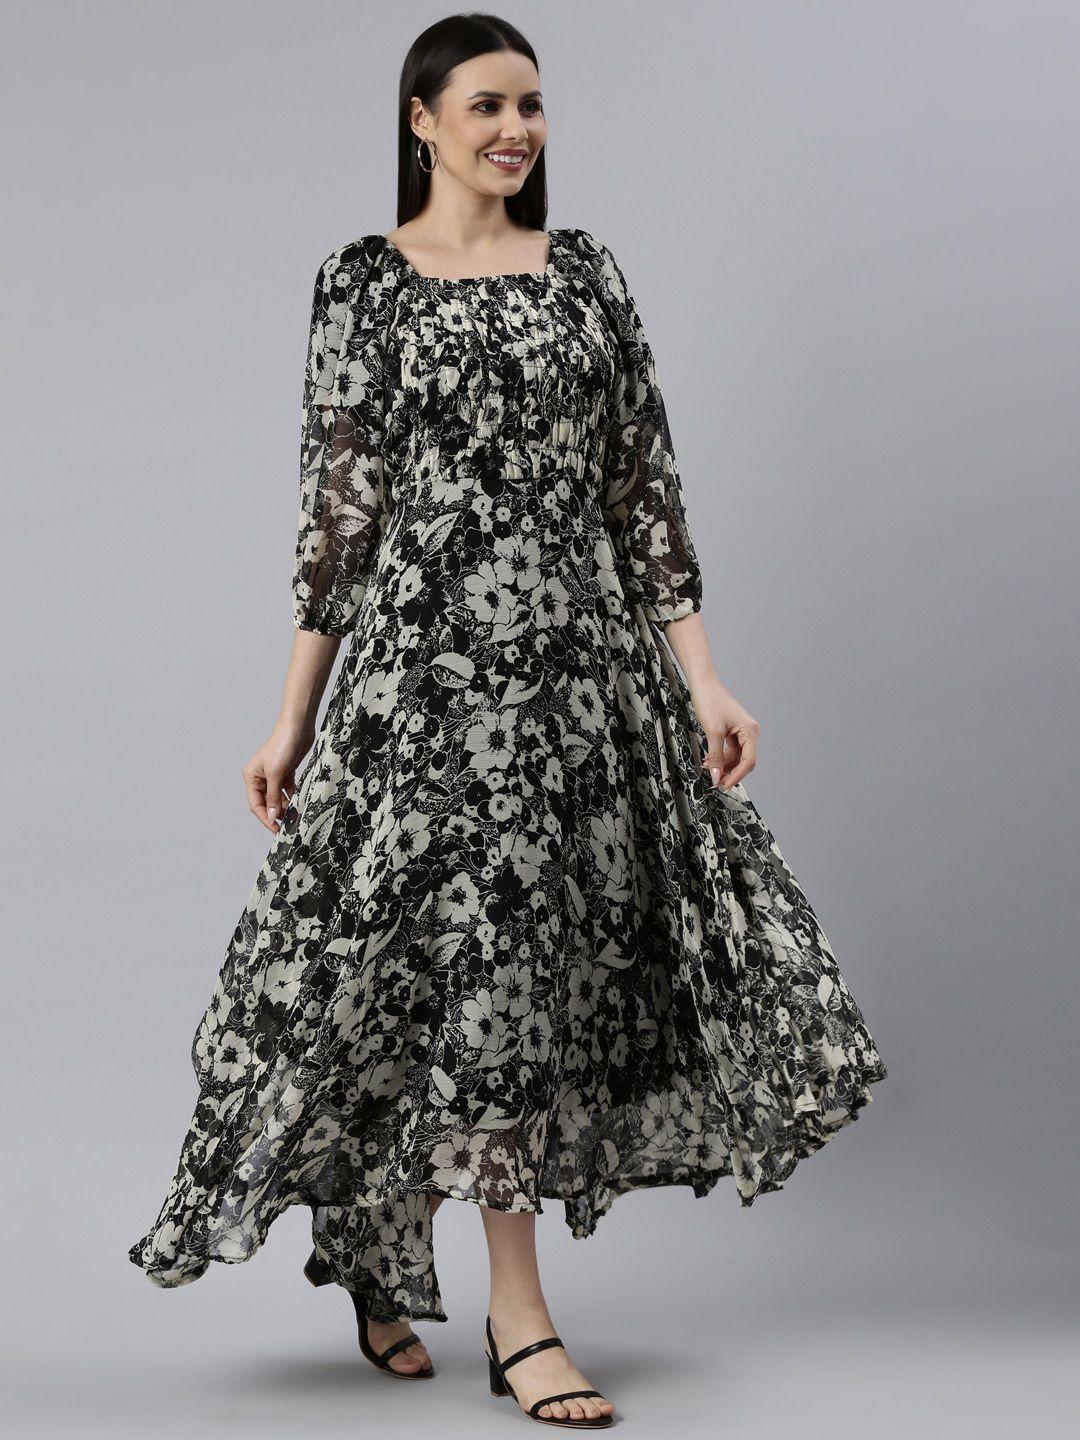 souchii-floral-printed-square-neck-puff-sleeves-smocked-fit-&-flare-dress